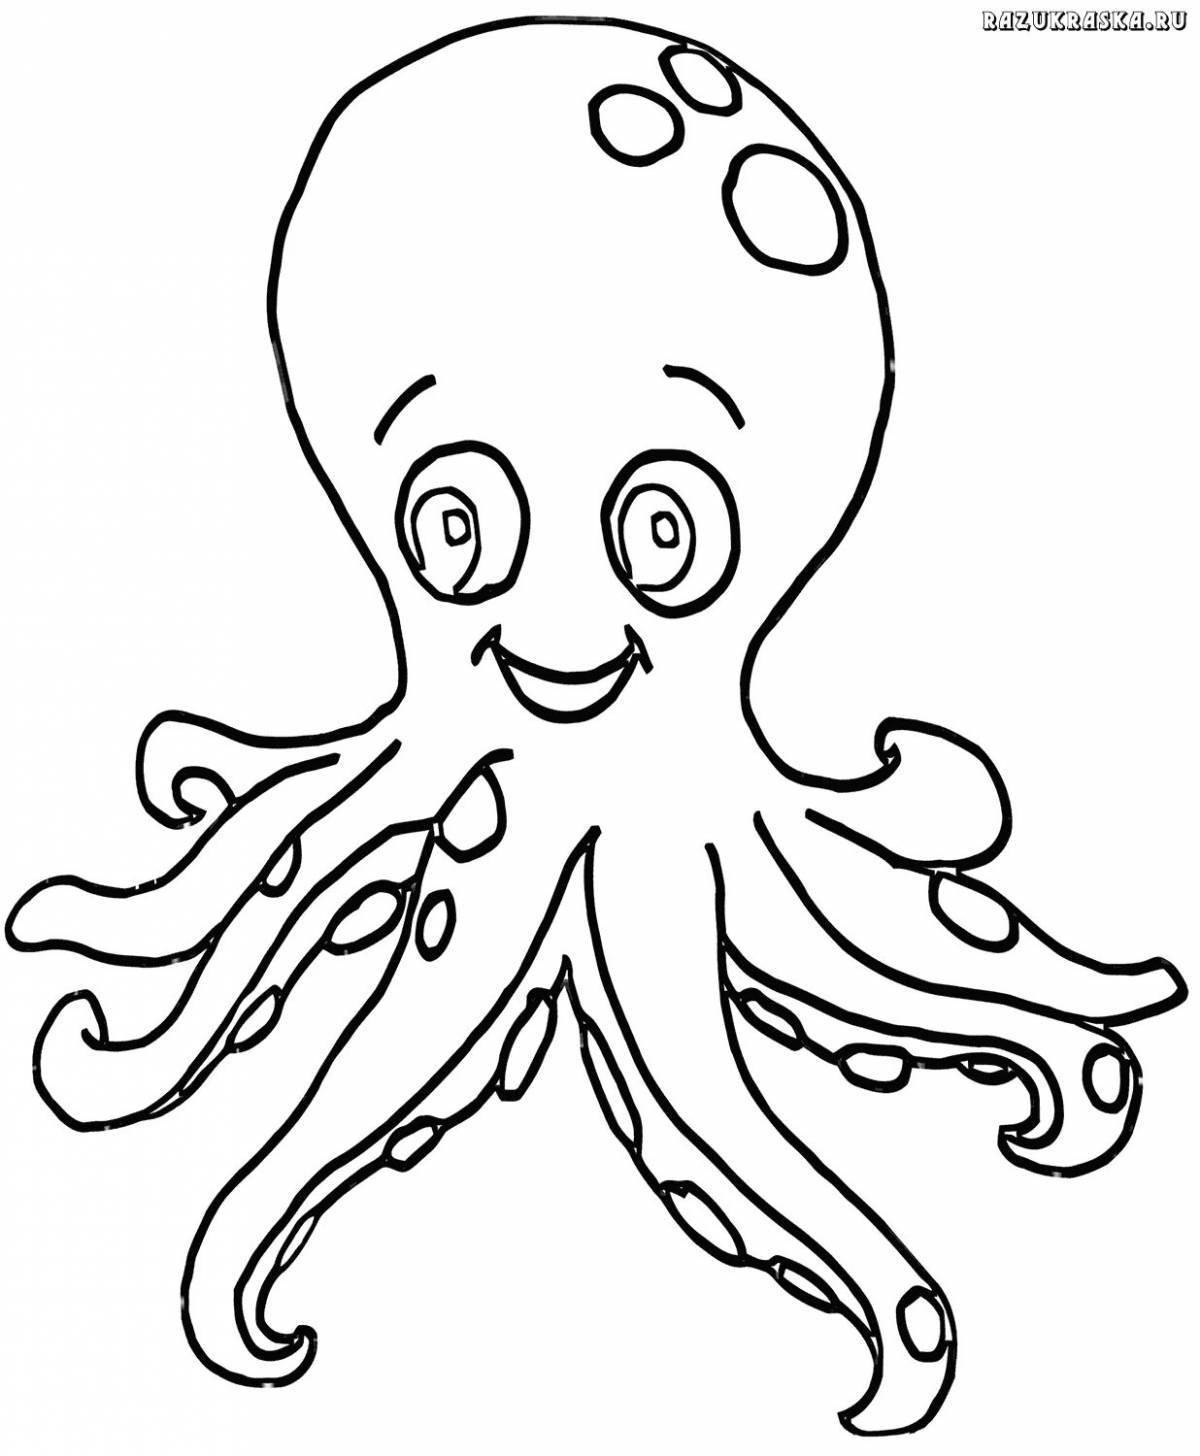 Cheap Octopus fun coloring page